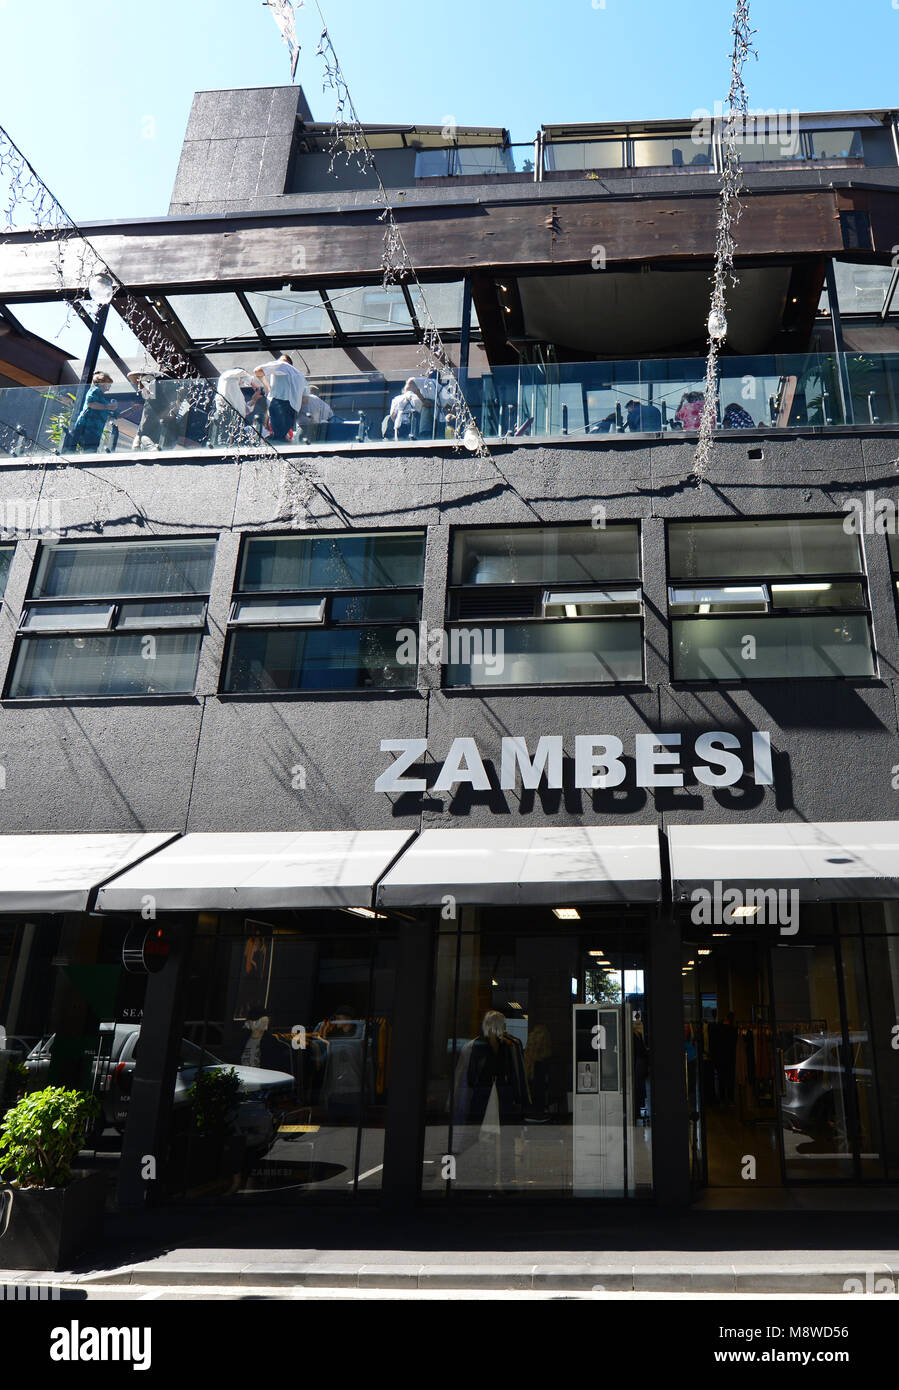 https://c8.alamy.com/comp/M8WD56/zambesi-clothing-shop-with-the-ostro-brasserie-bar-on-top-M8WD56.jpg